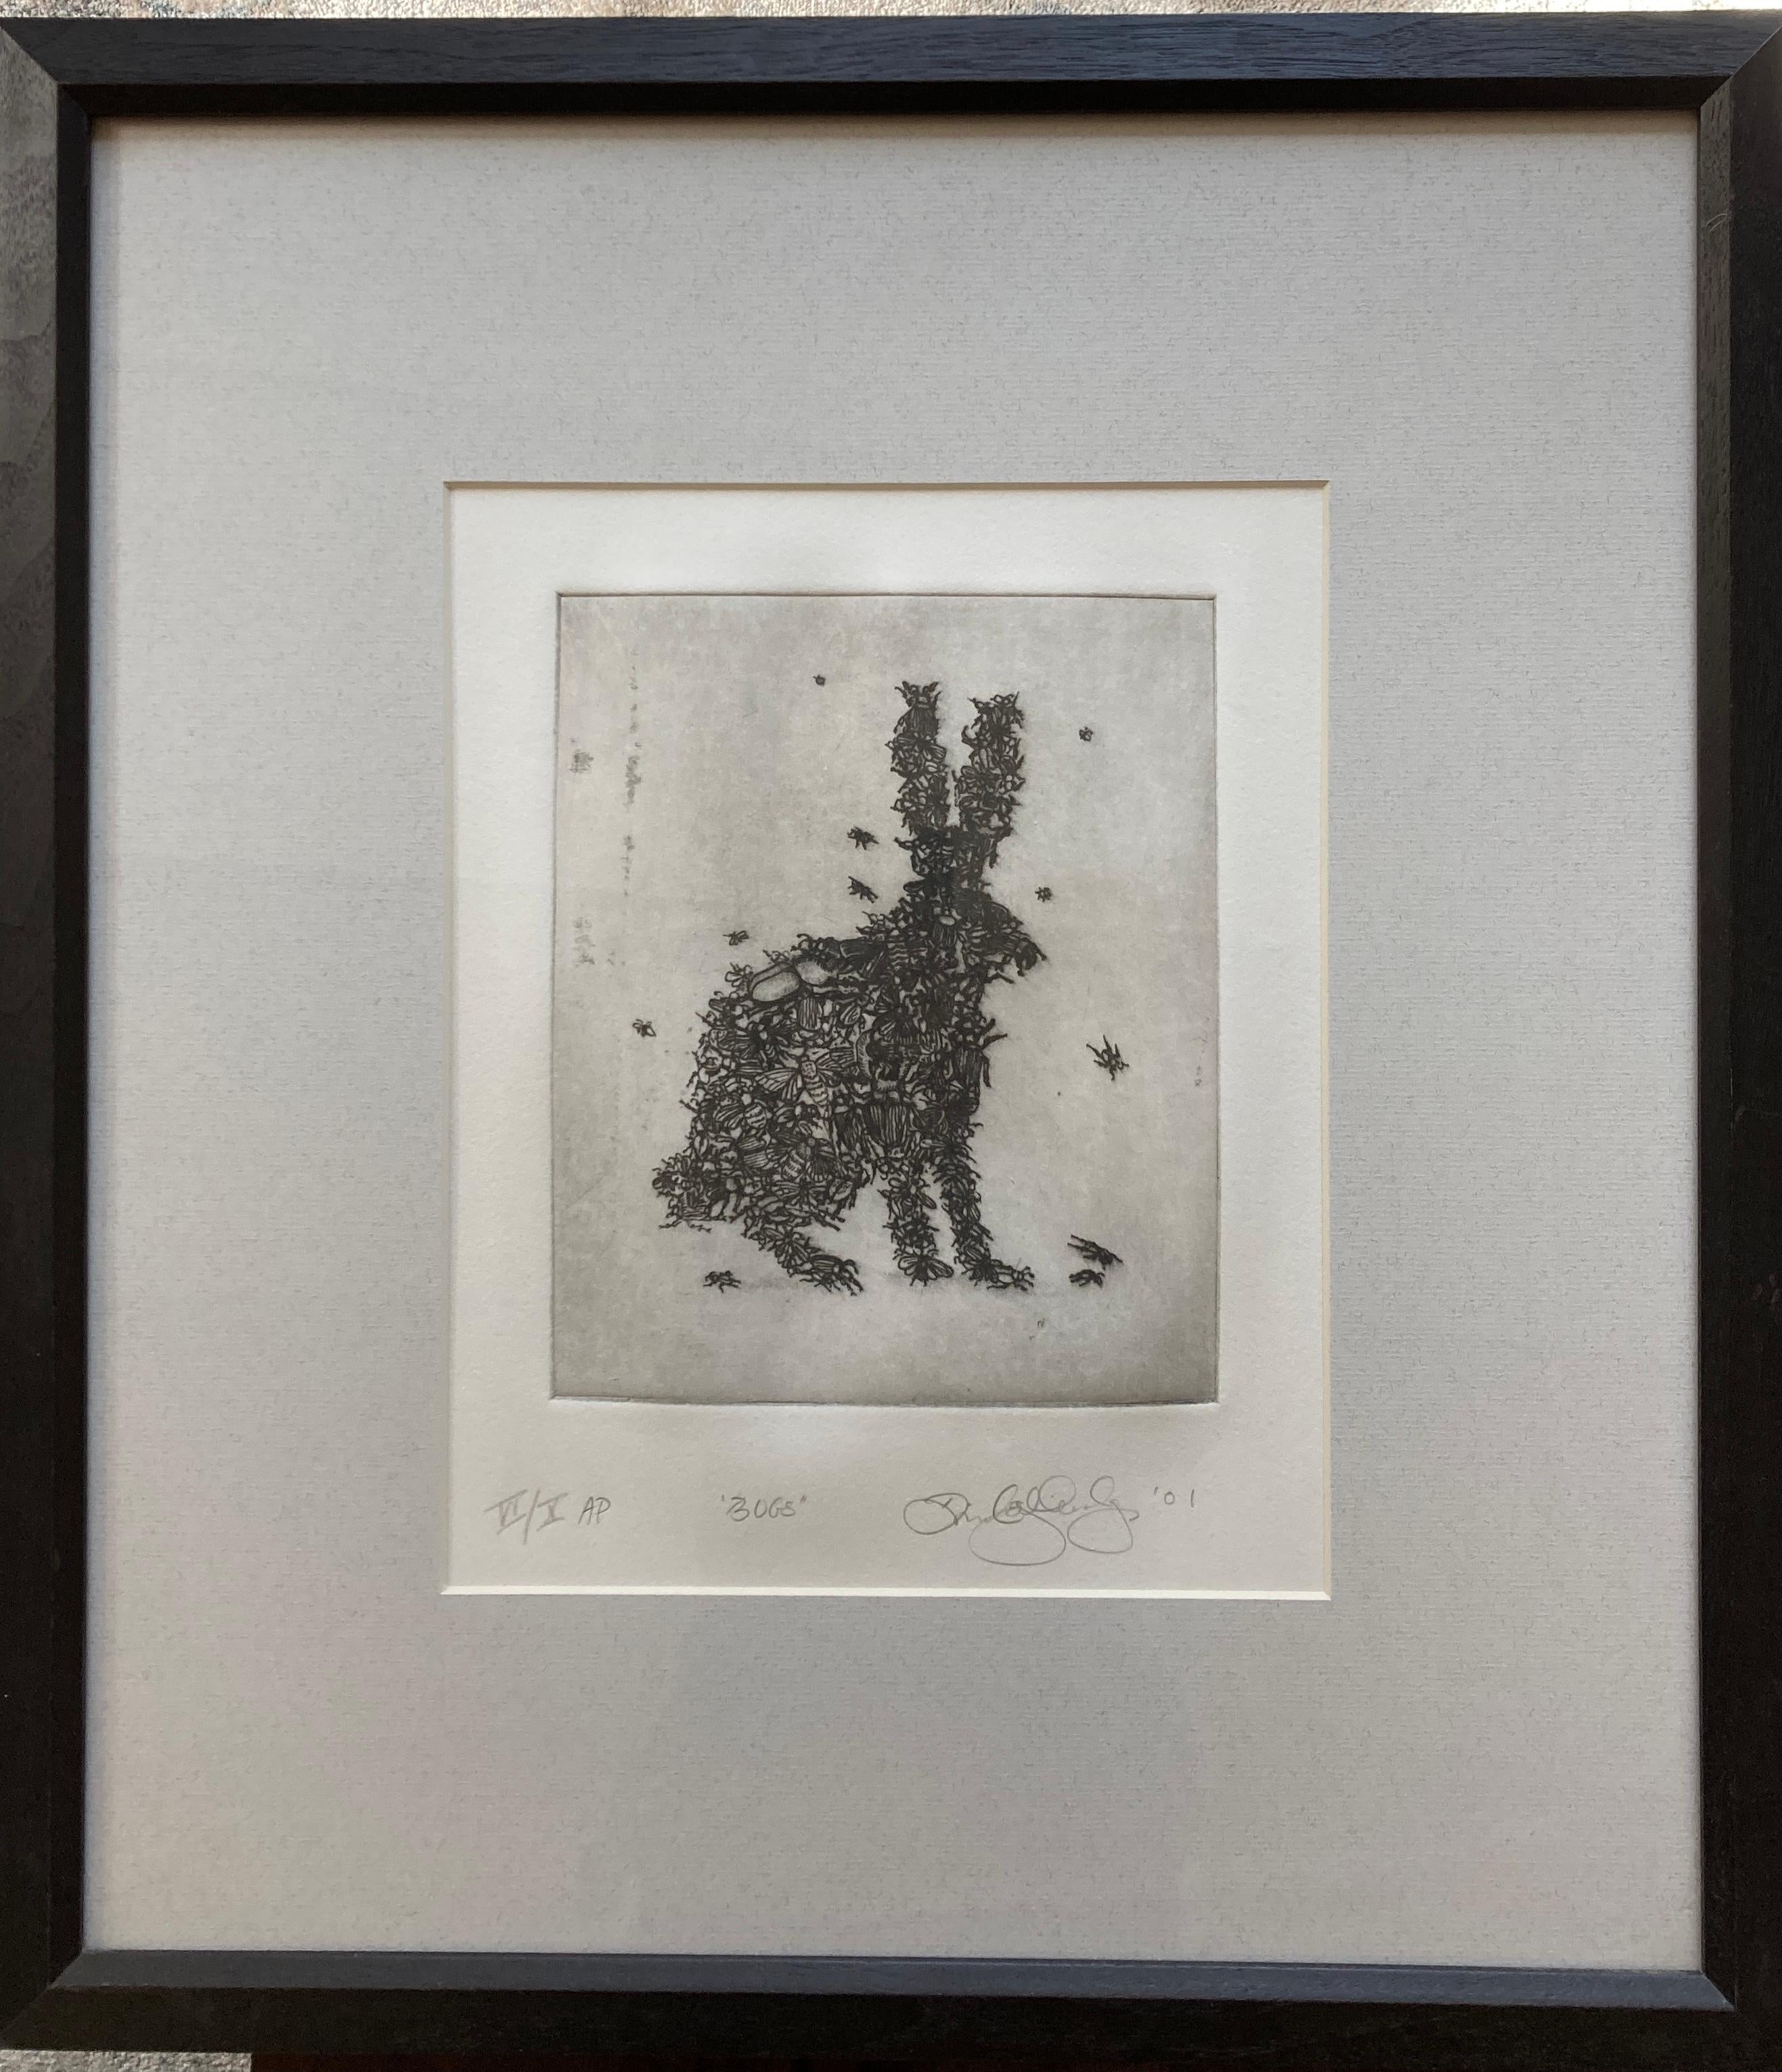 David Gilhooly 'Bugs' Artist's Proof Signed Etching Print For Sale 2